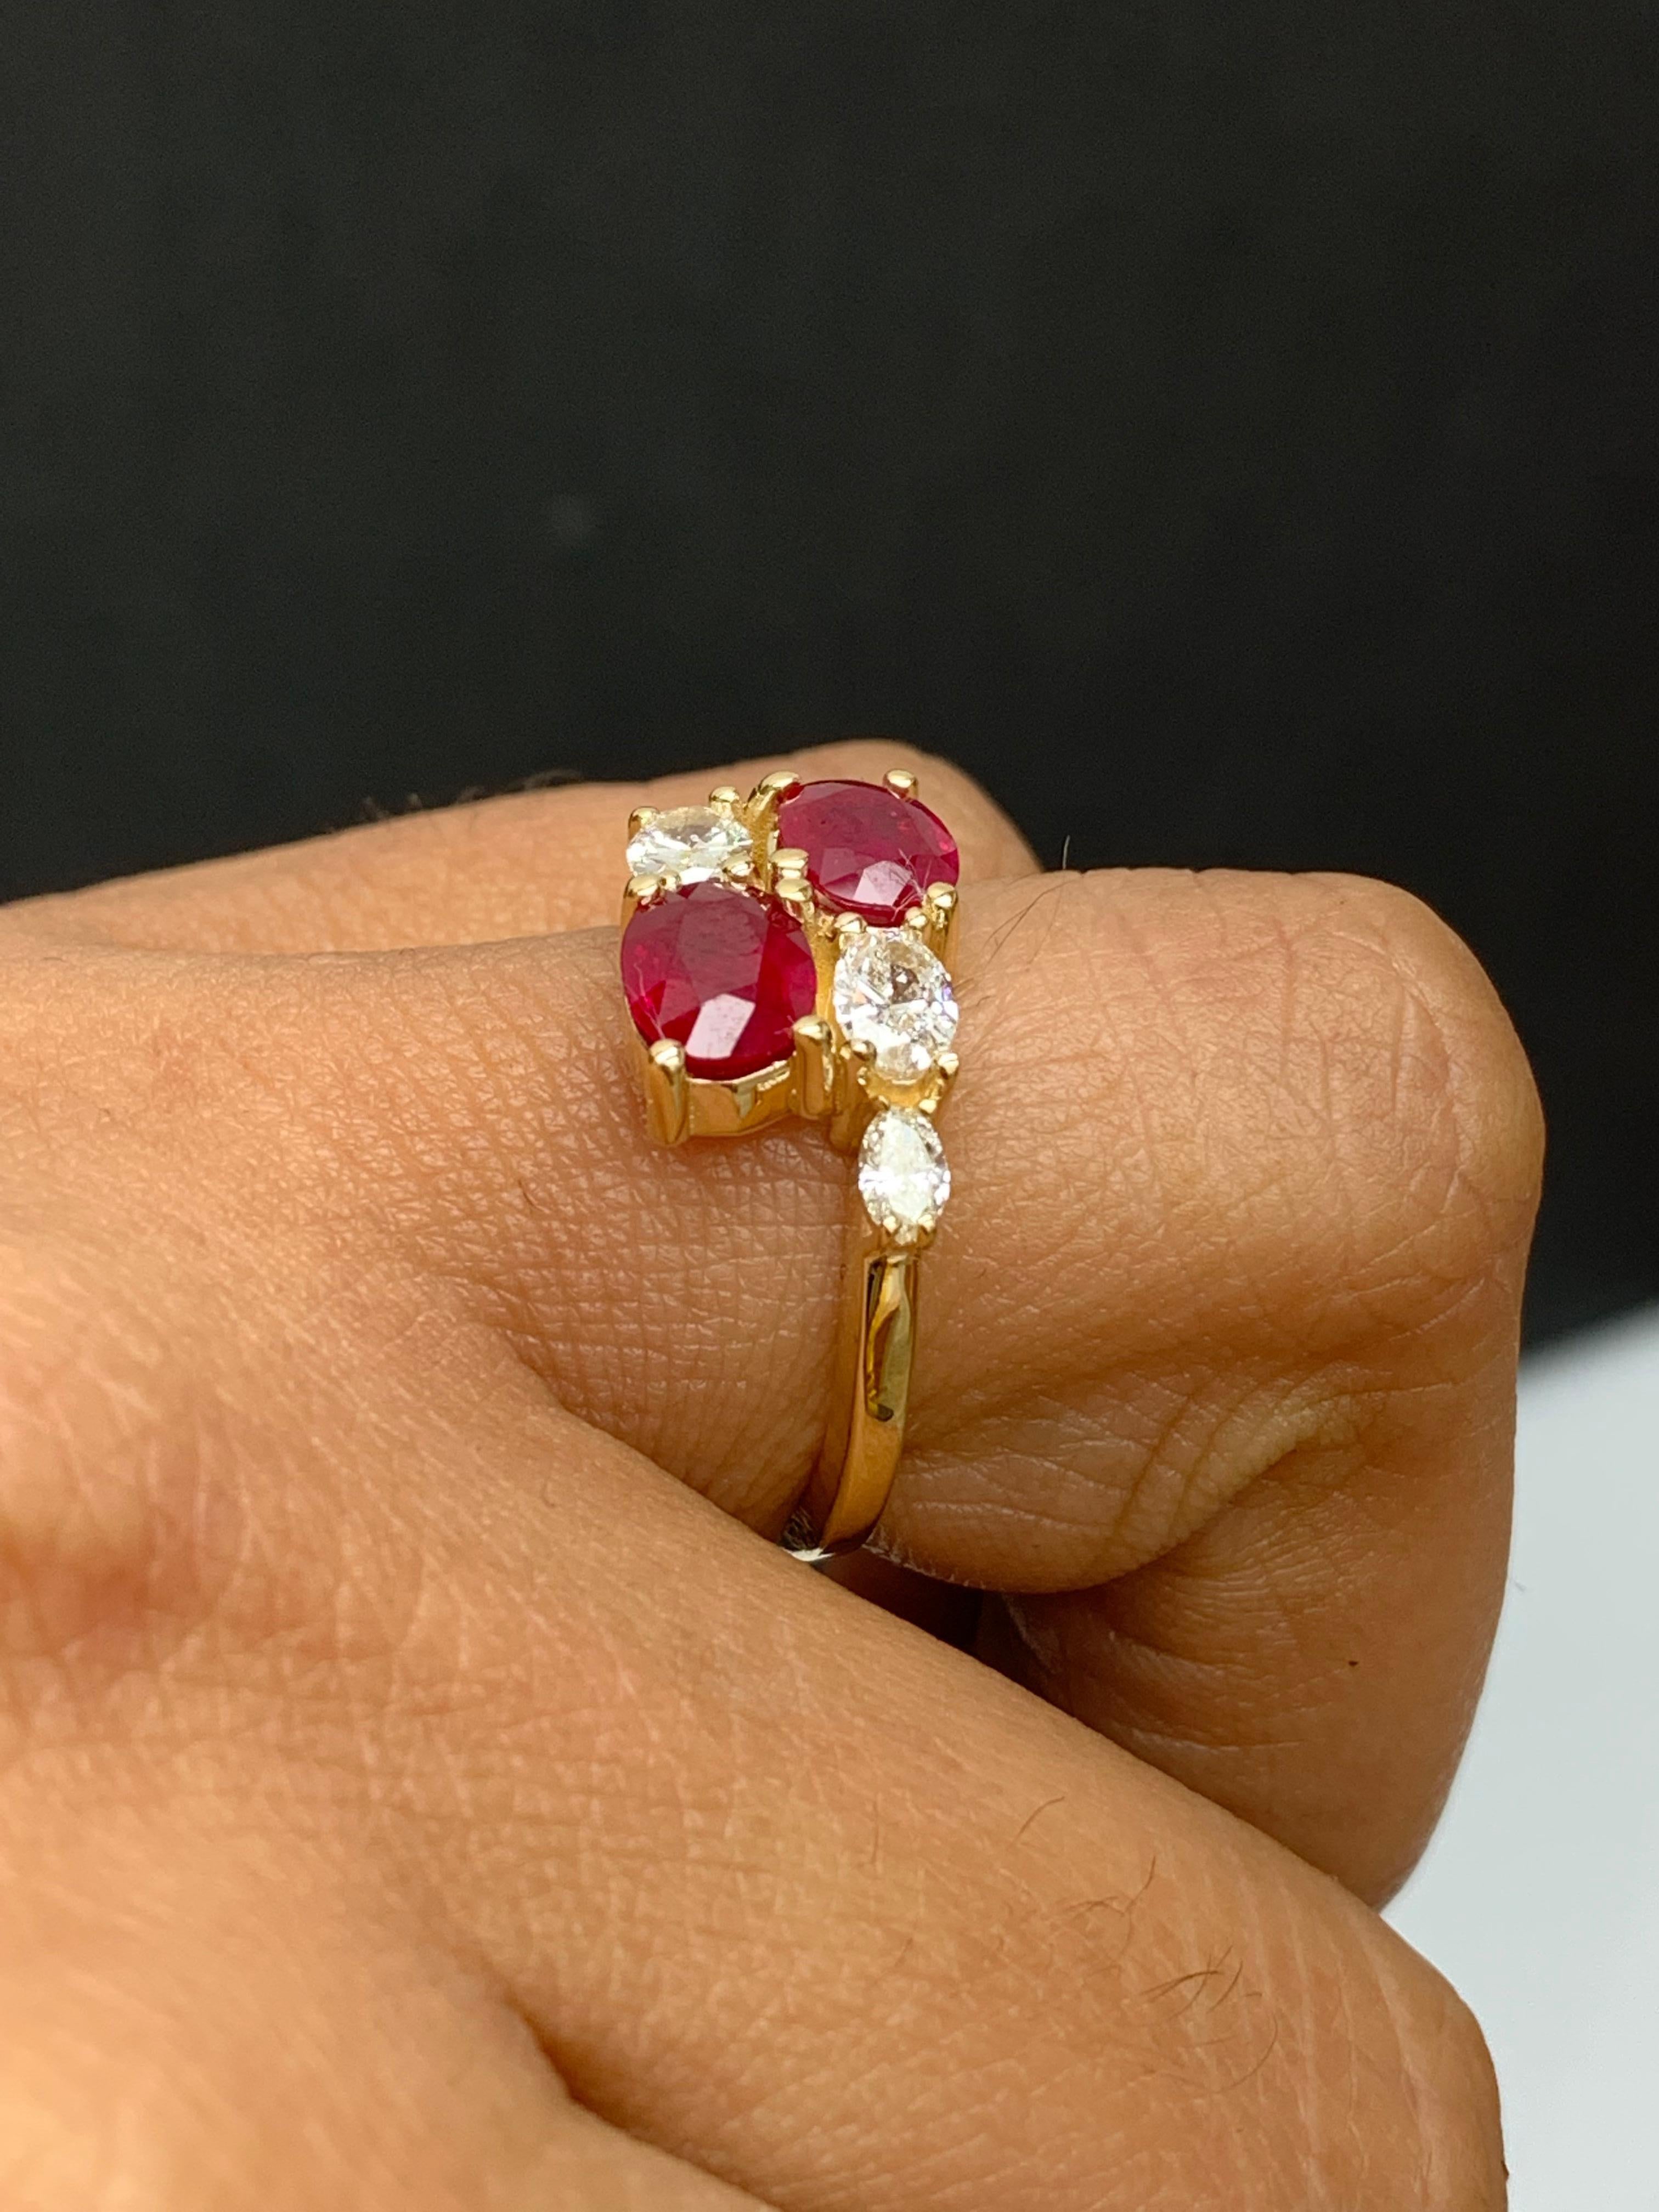 Women's 2.18 Carat Oval Cut Ruby Diamond Toi et Moi Engagement Ring in 14K Yellow Gold For Sale